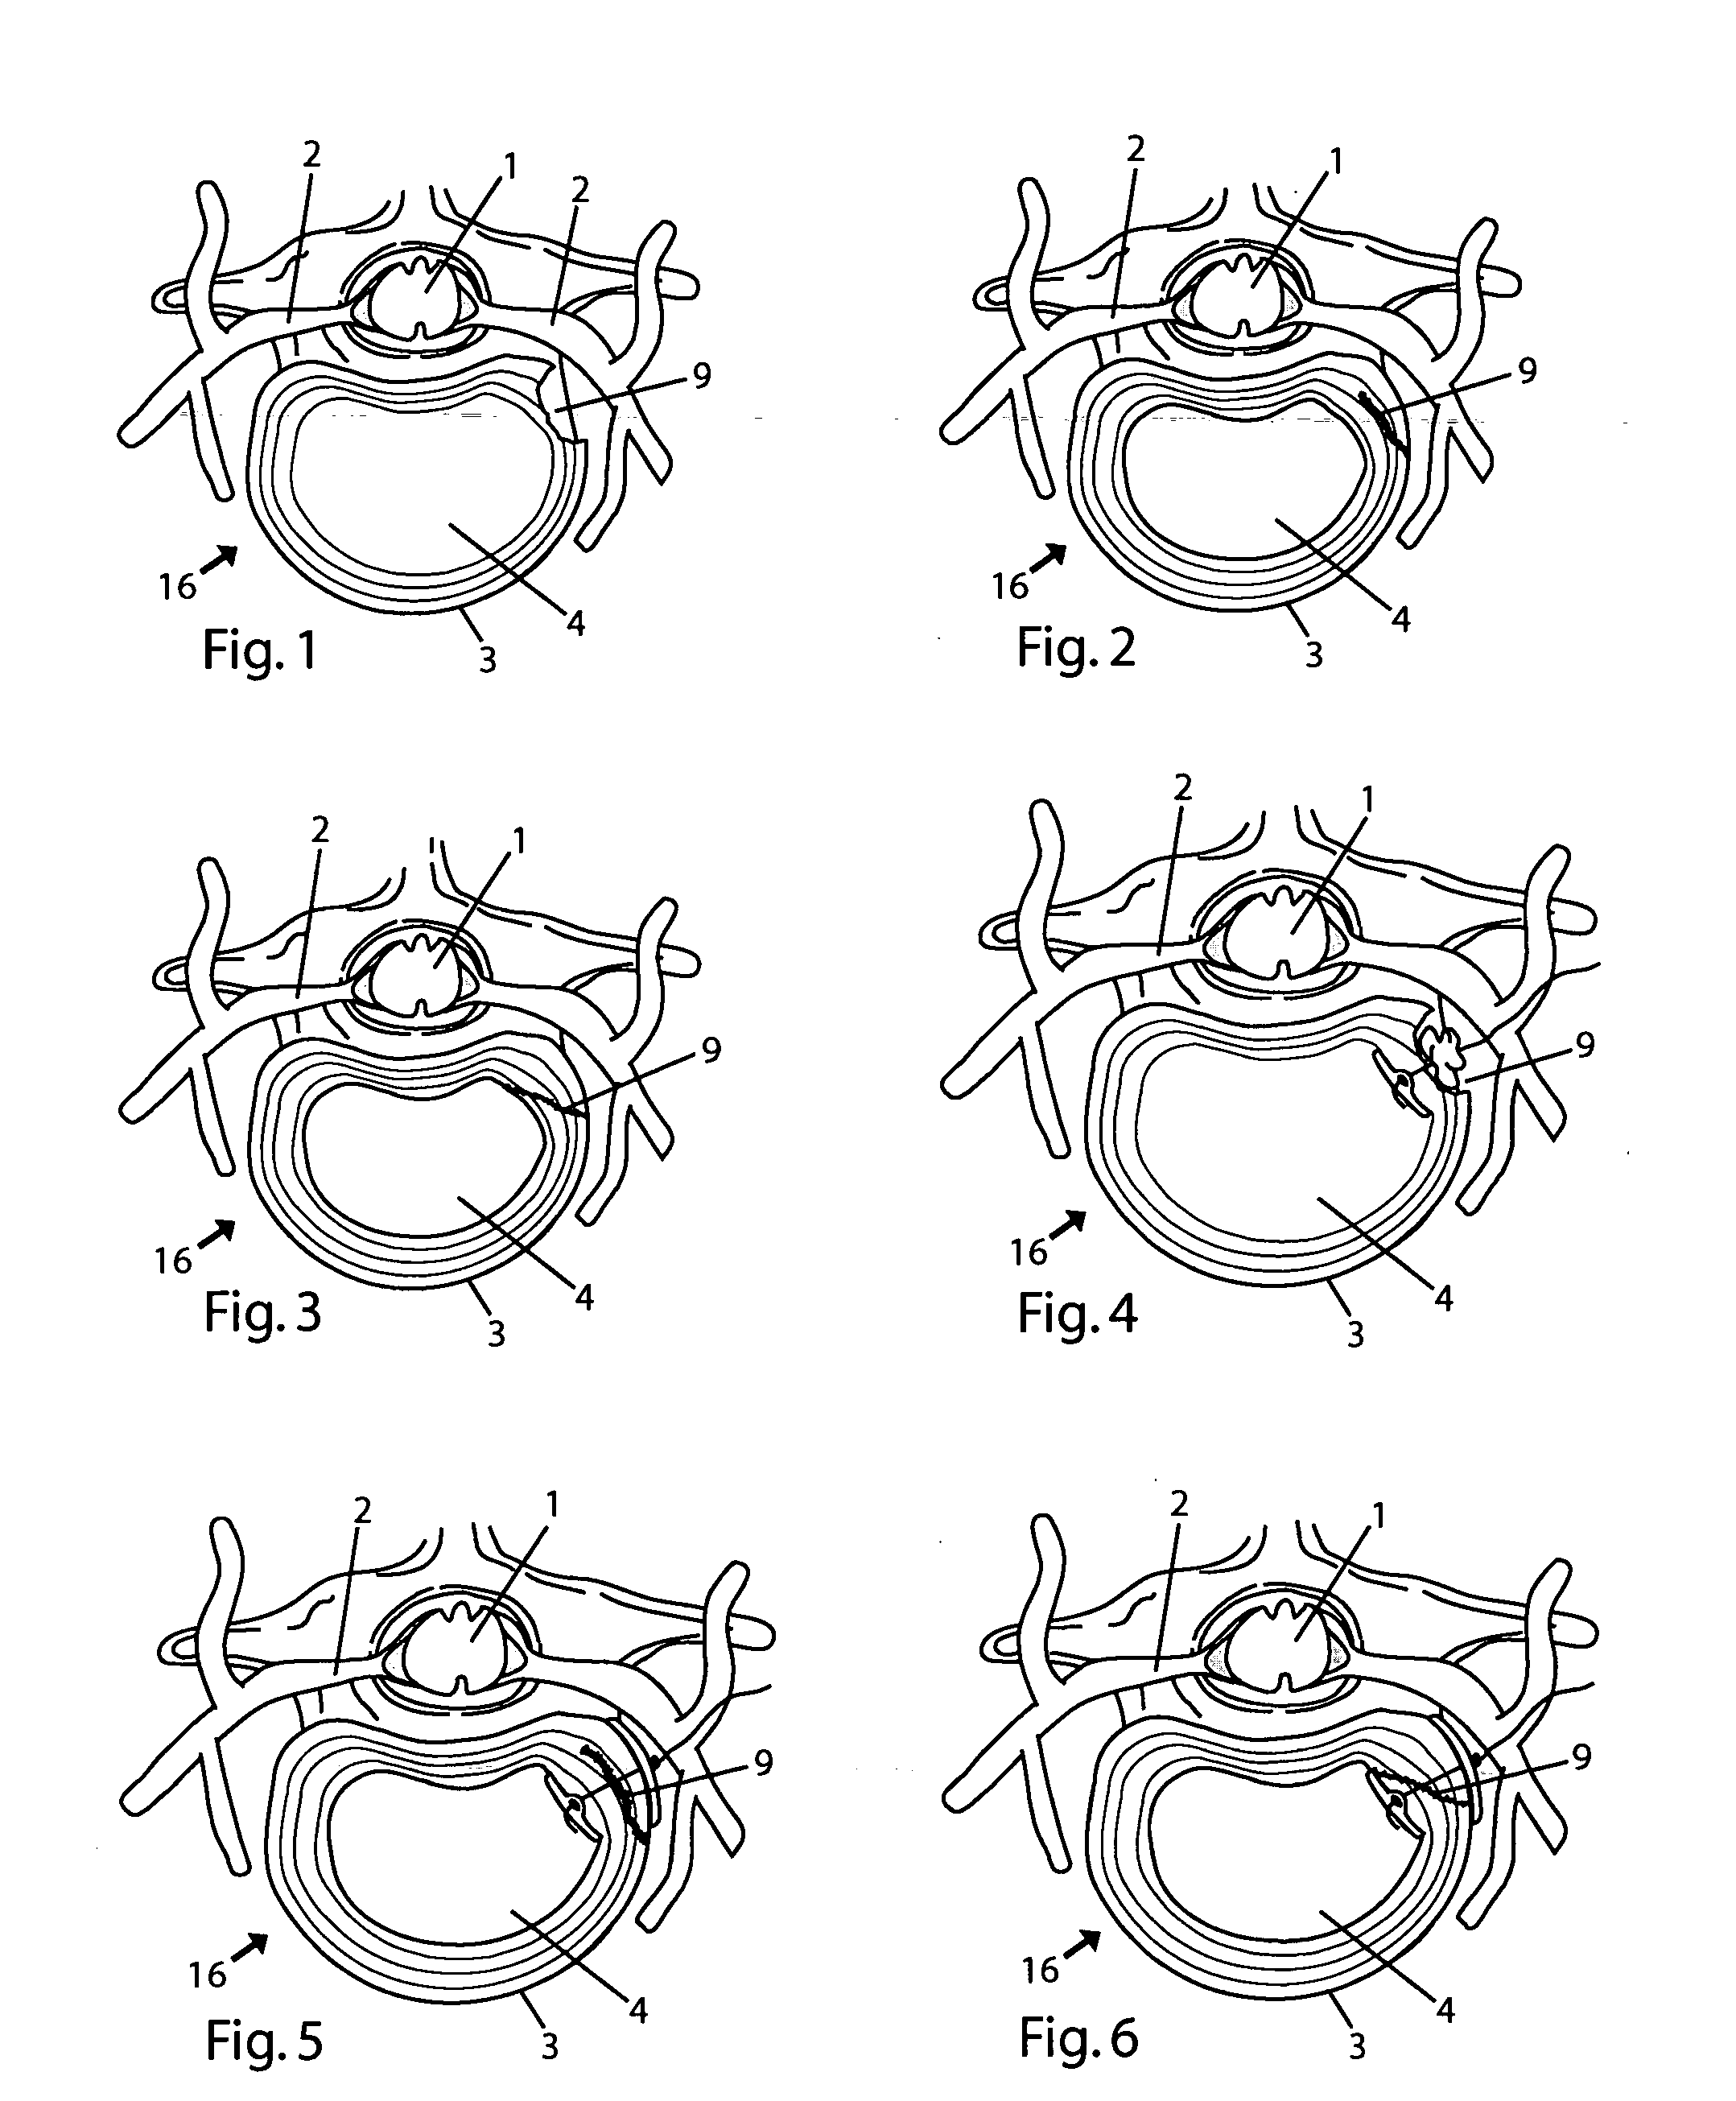 System and devices for the repair of a vertebral disc defect